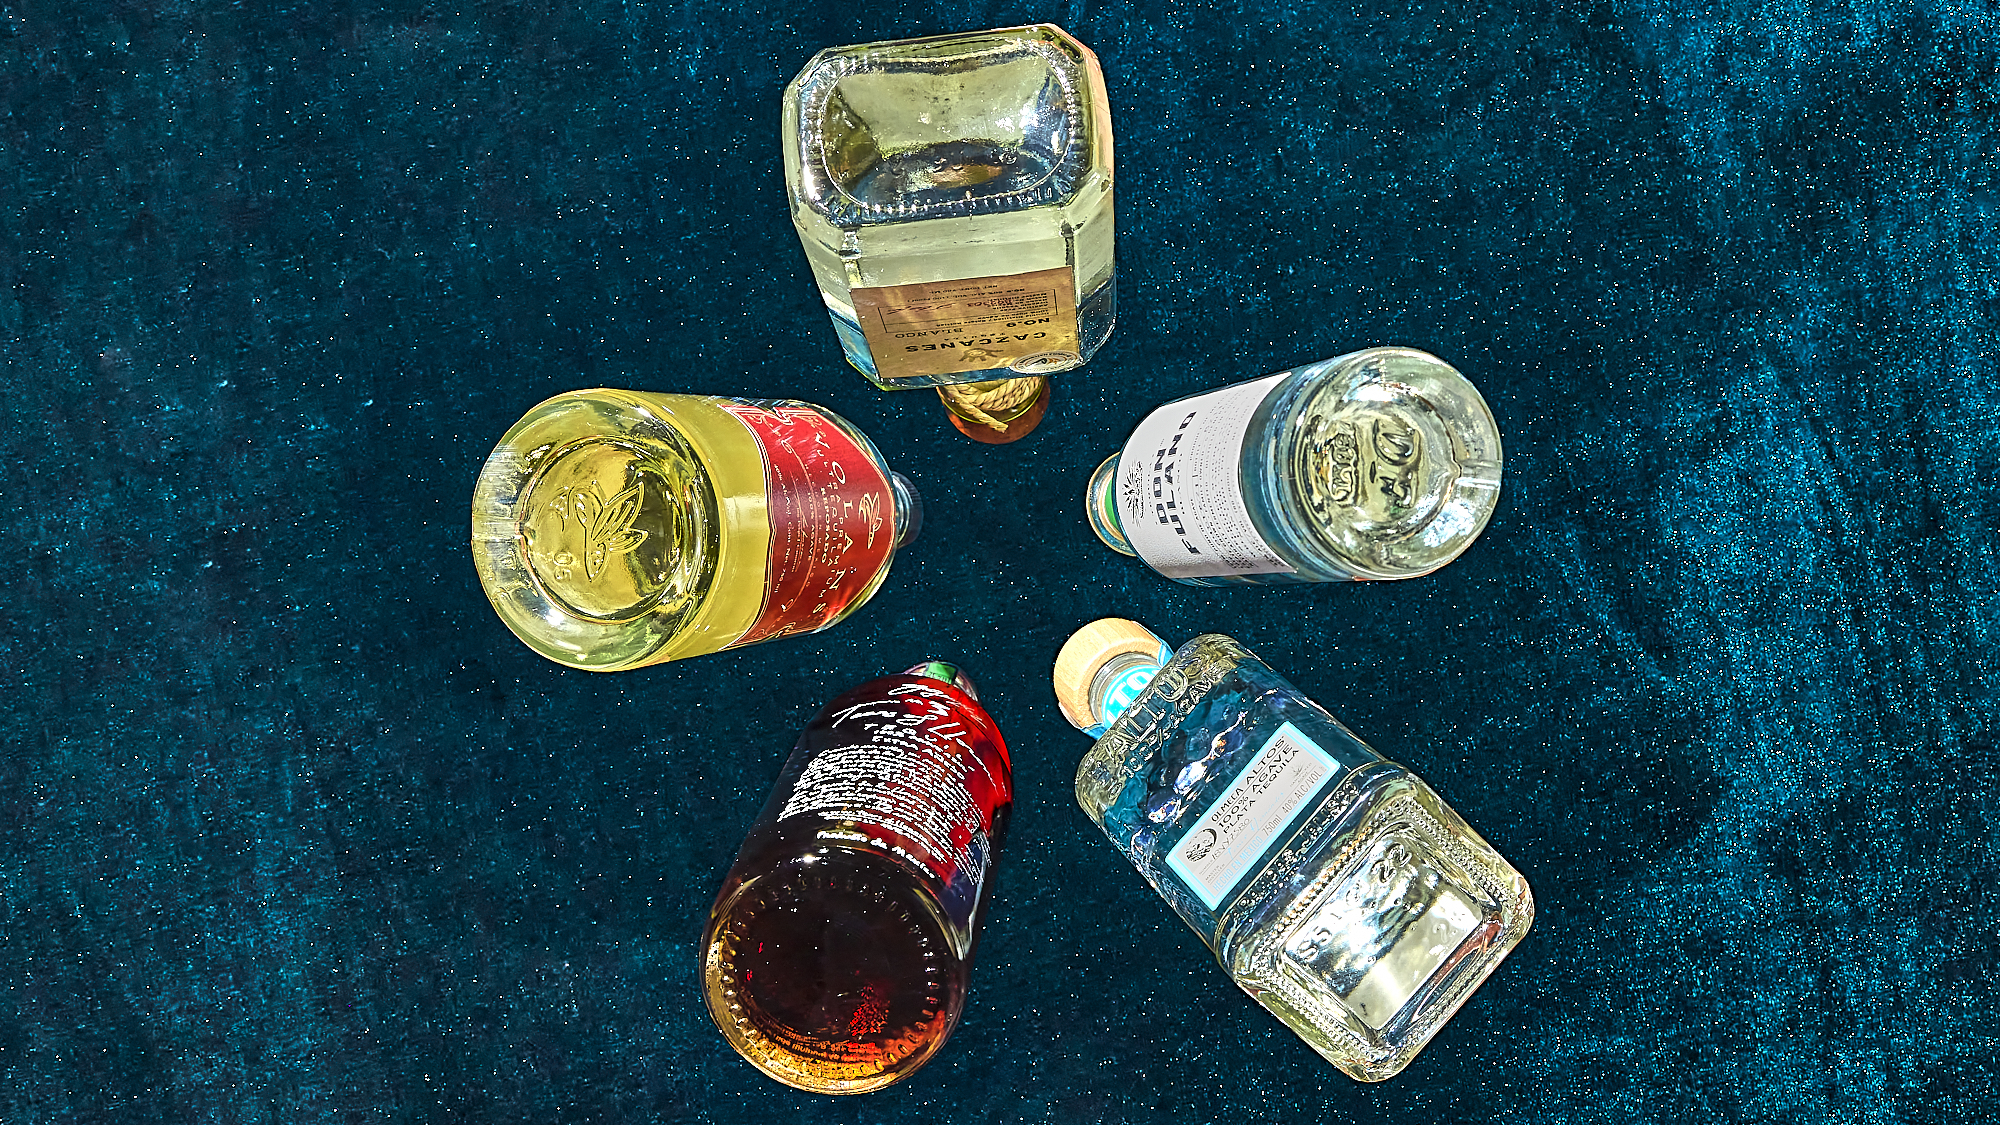 The 30 Best Tequilas for 2024